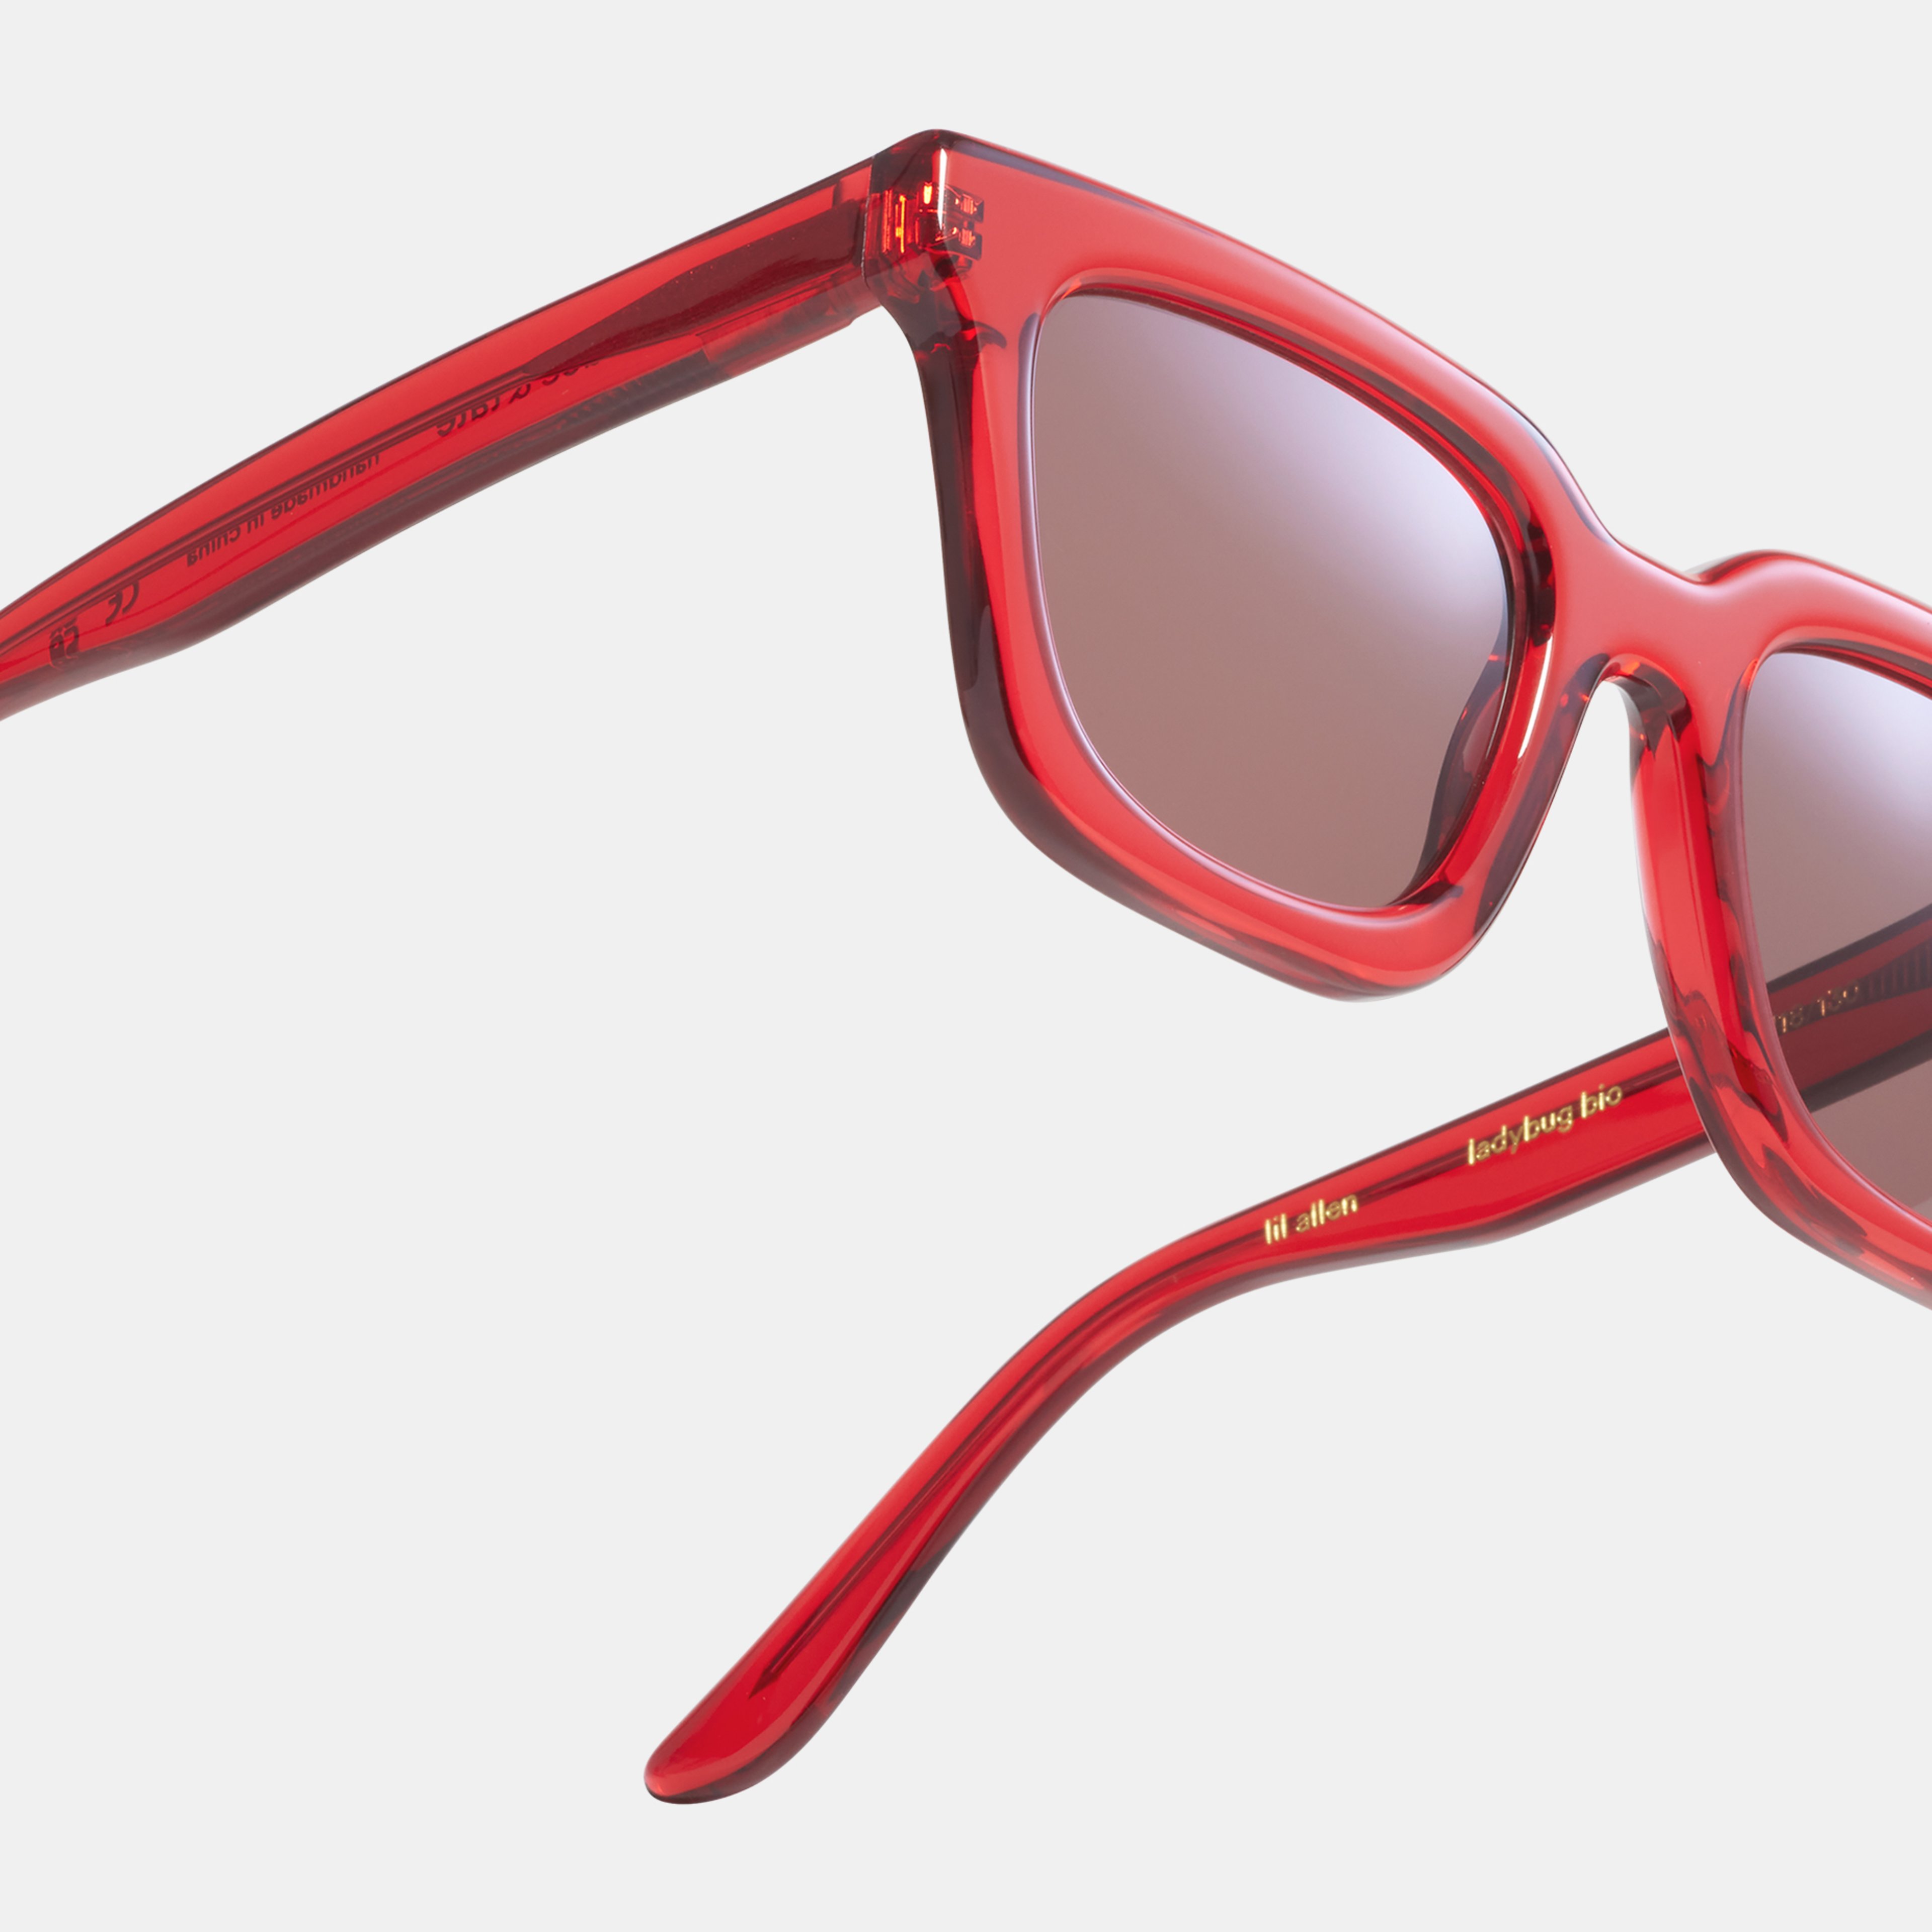 Ace & Tate Solaires | carrée Renew bio-acétate in Rouge